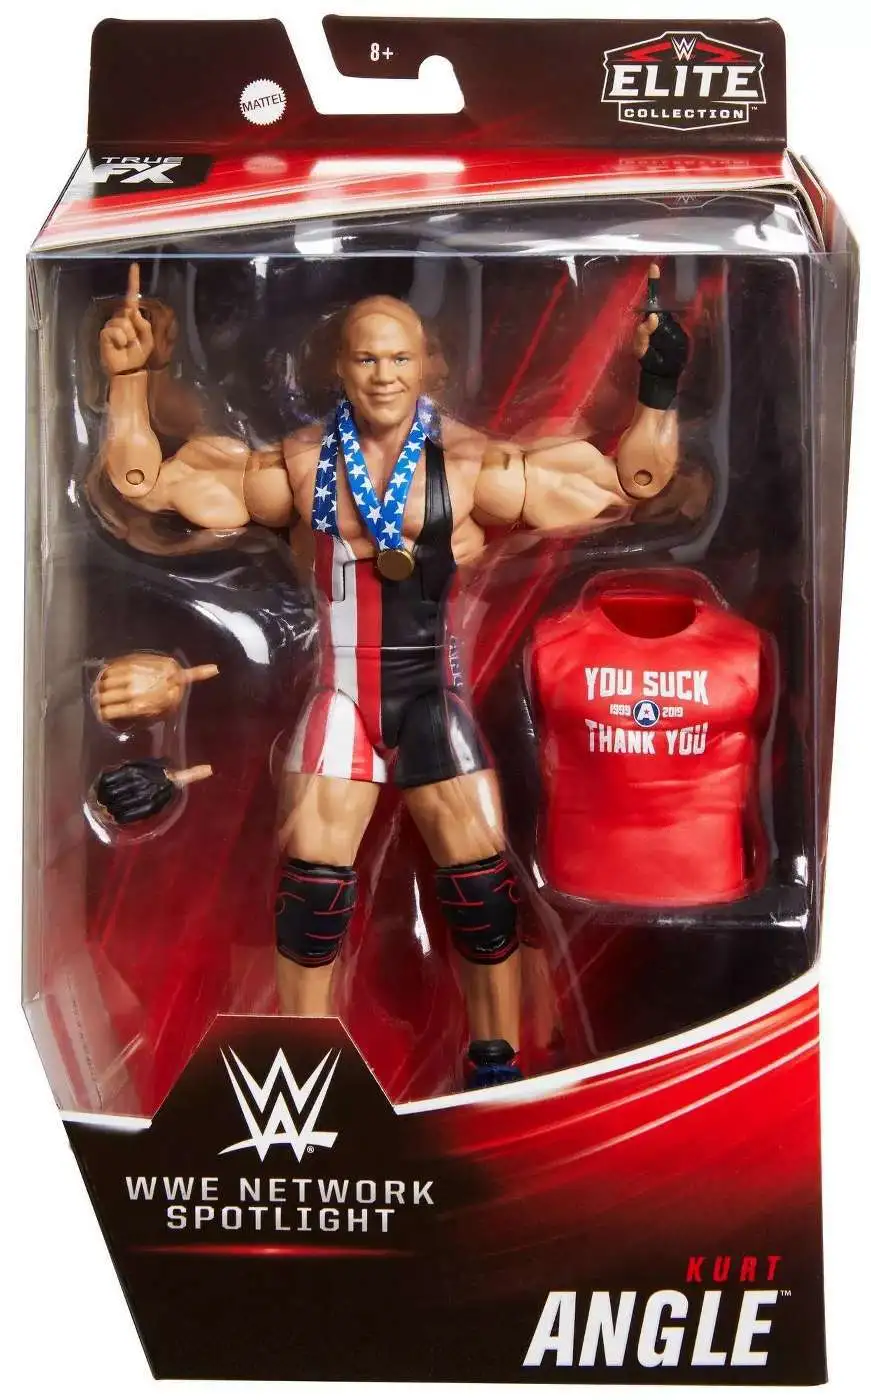 Details about   WWE Elite Collection Wrestling Action Figure Kurt Angle WWE Network Spotlight 